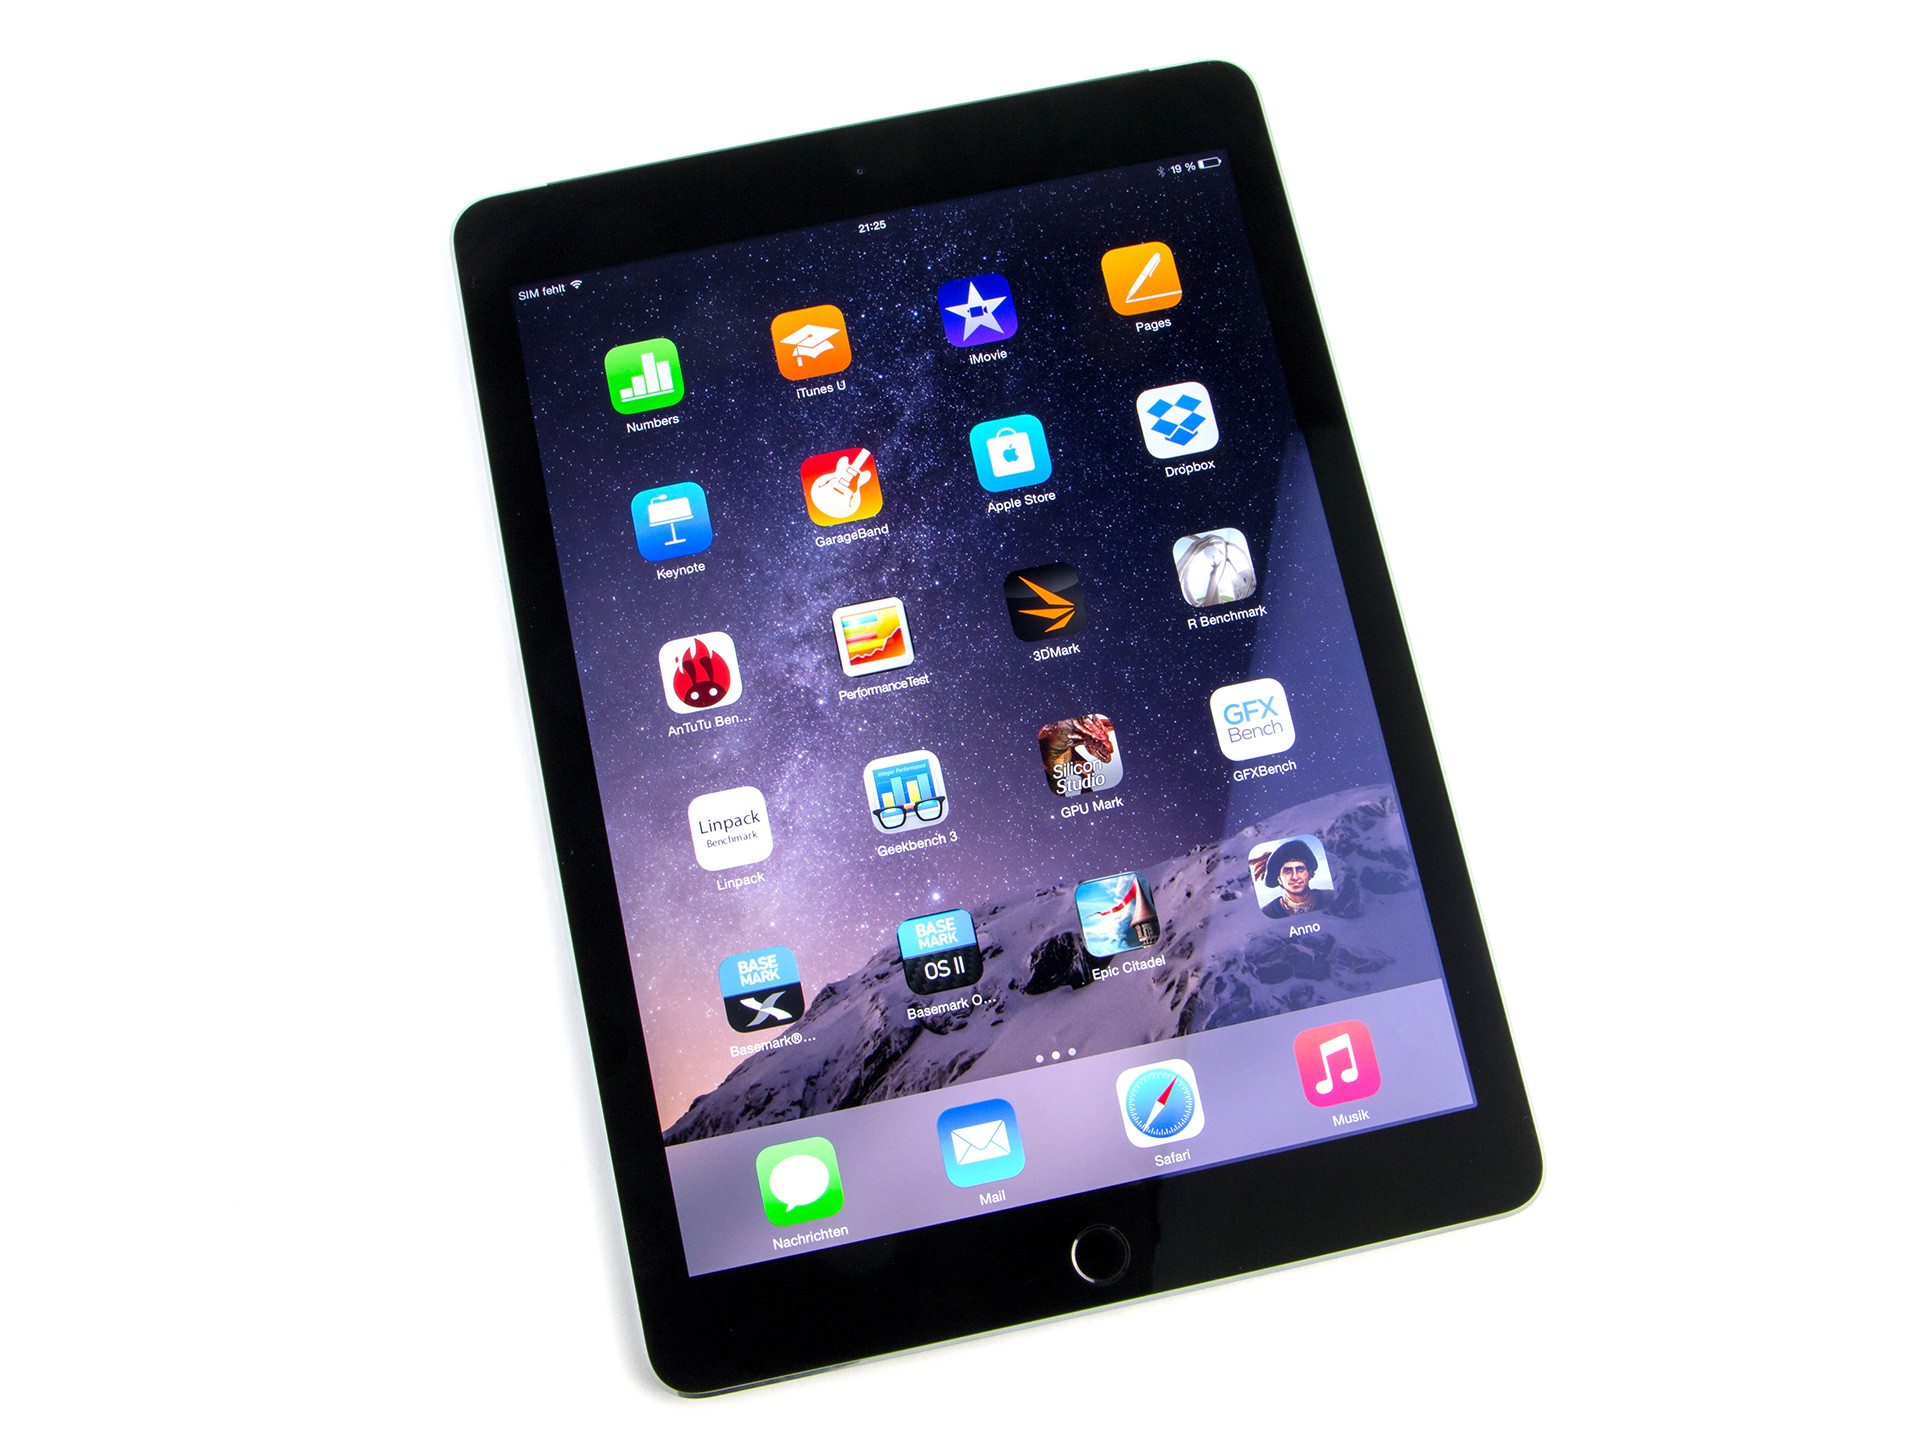 1920x1440 Test Apple iPad Air 2 (A1567 / 128 GB / LTE) Tablet - Notebookcheck.com  Tests